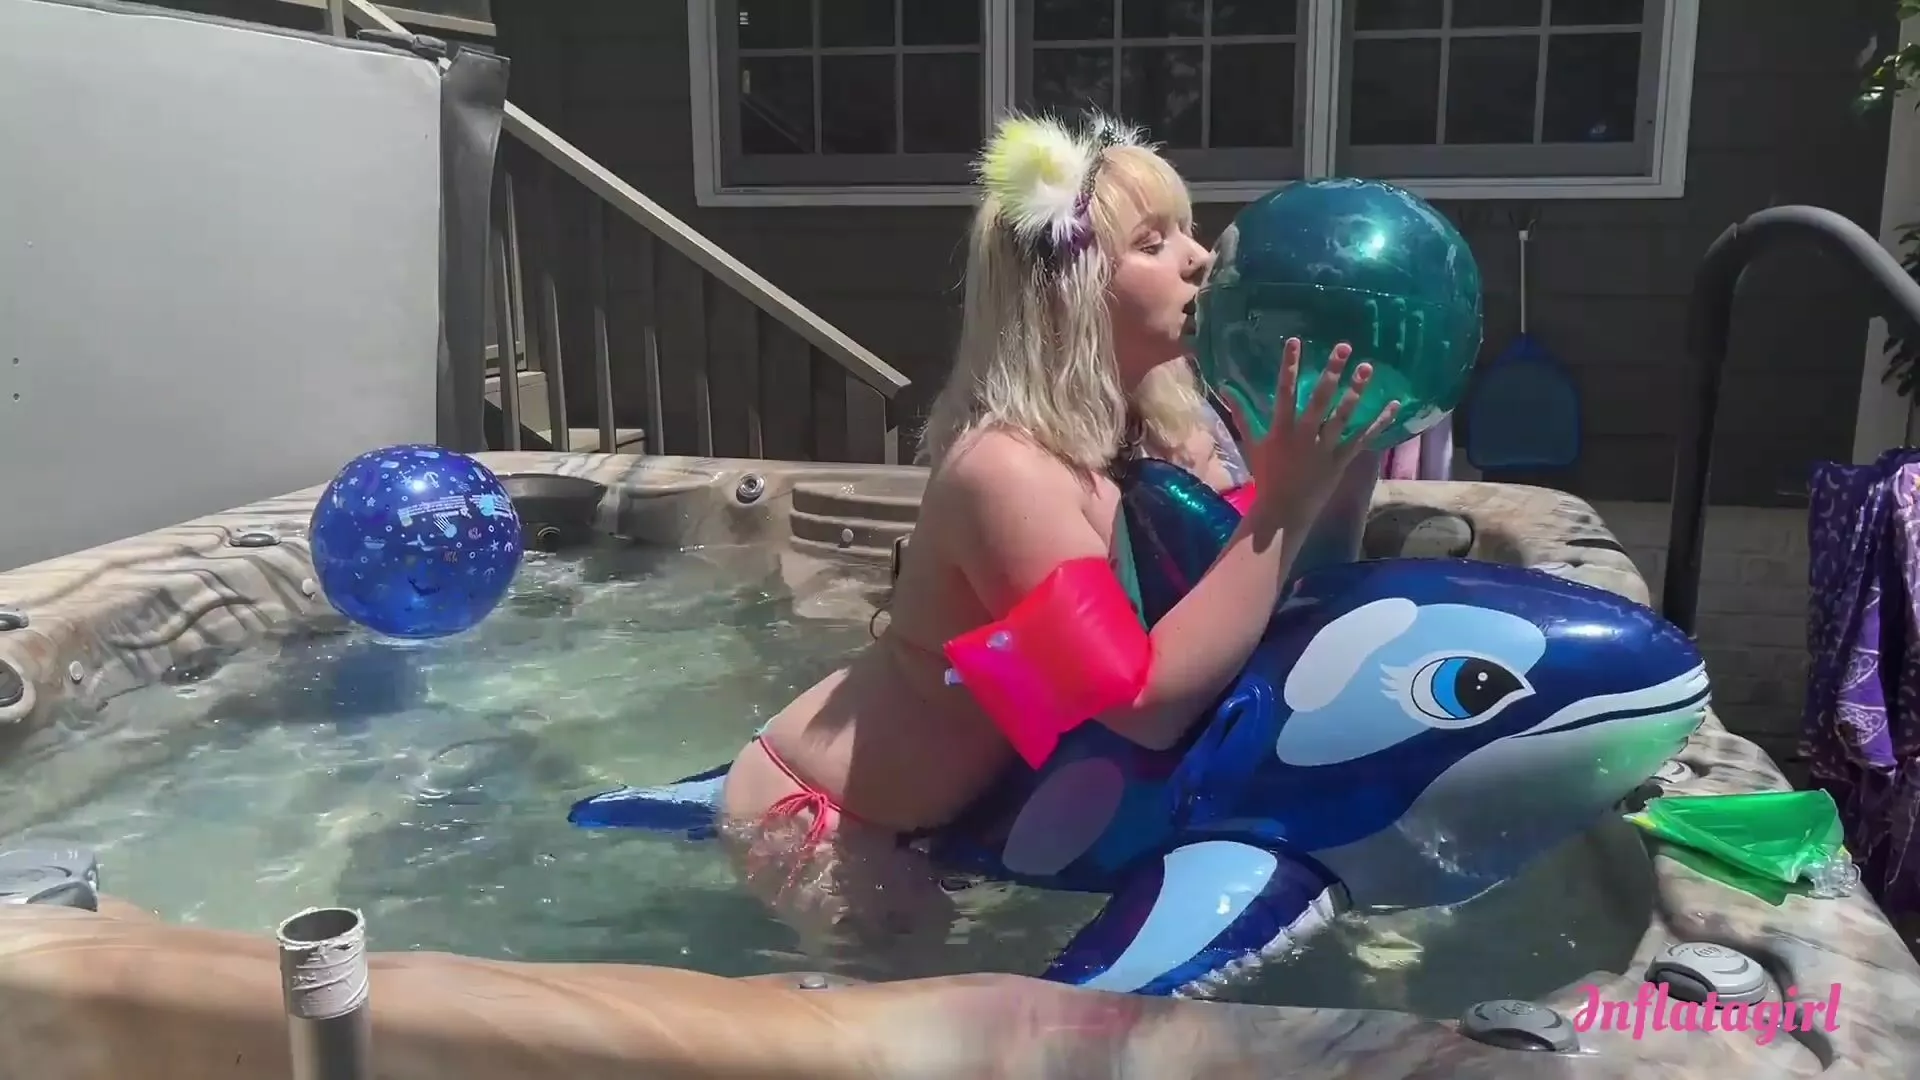 Www Swimming Pool Hot Xxx Vdo - Inflatagirl fun with my pool toys in the hot tub xxx video